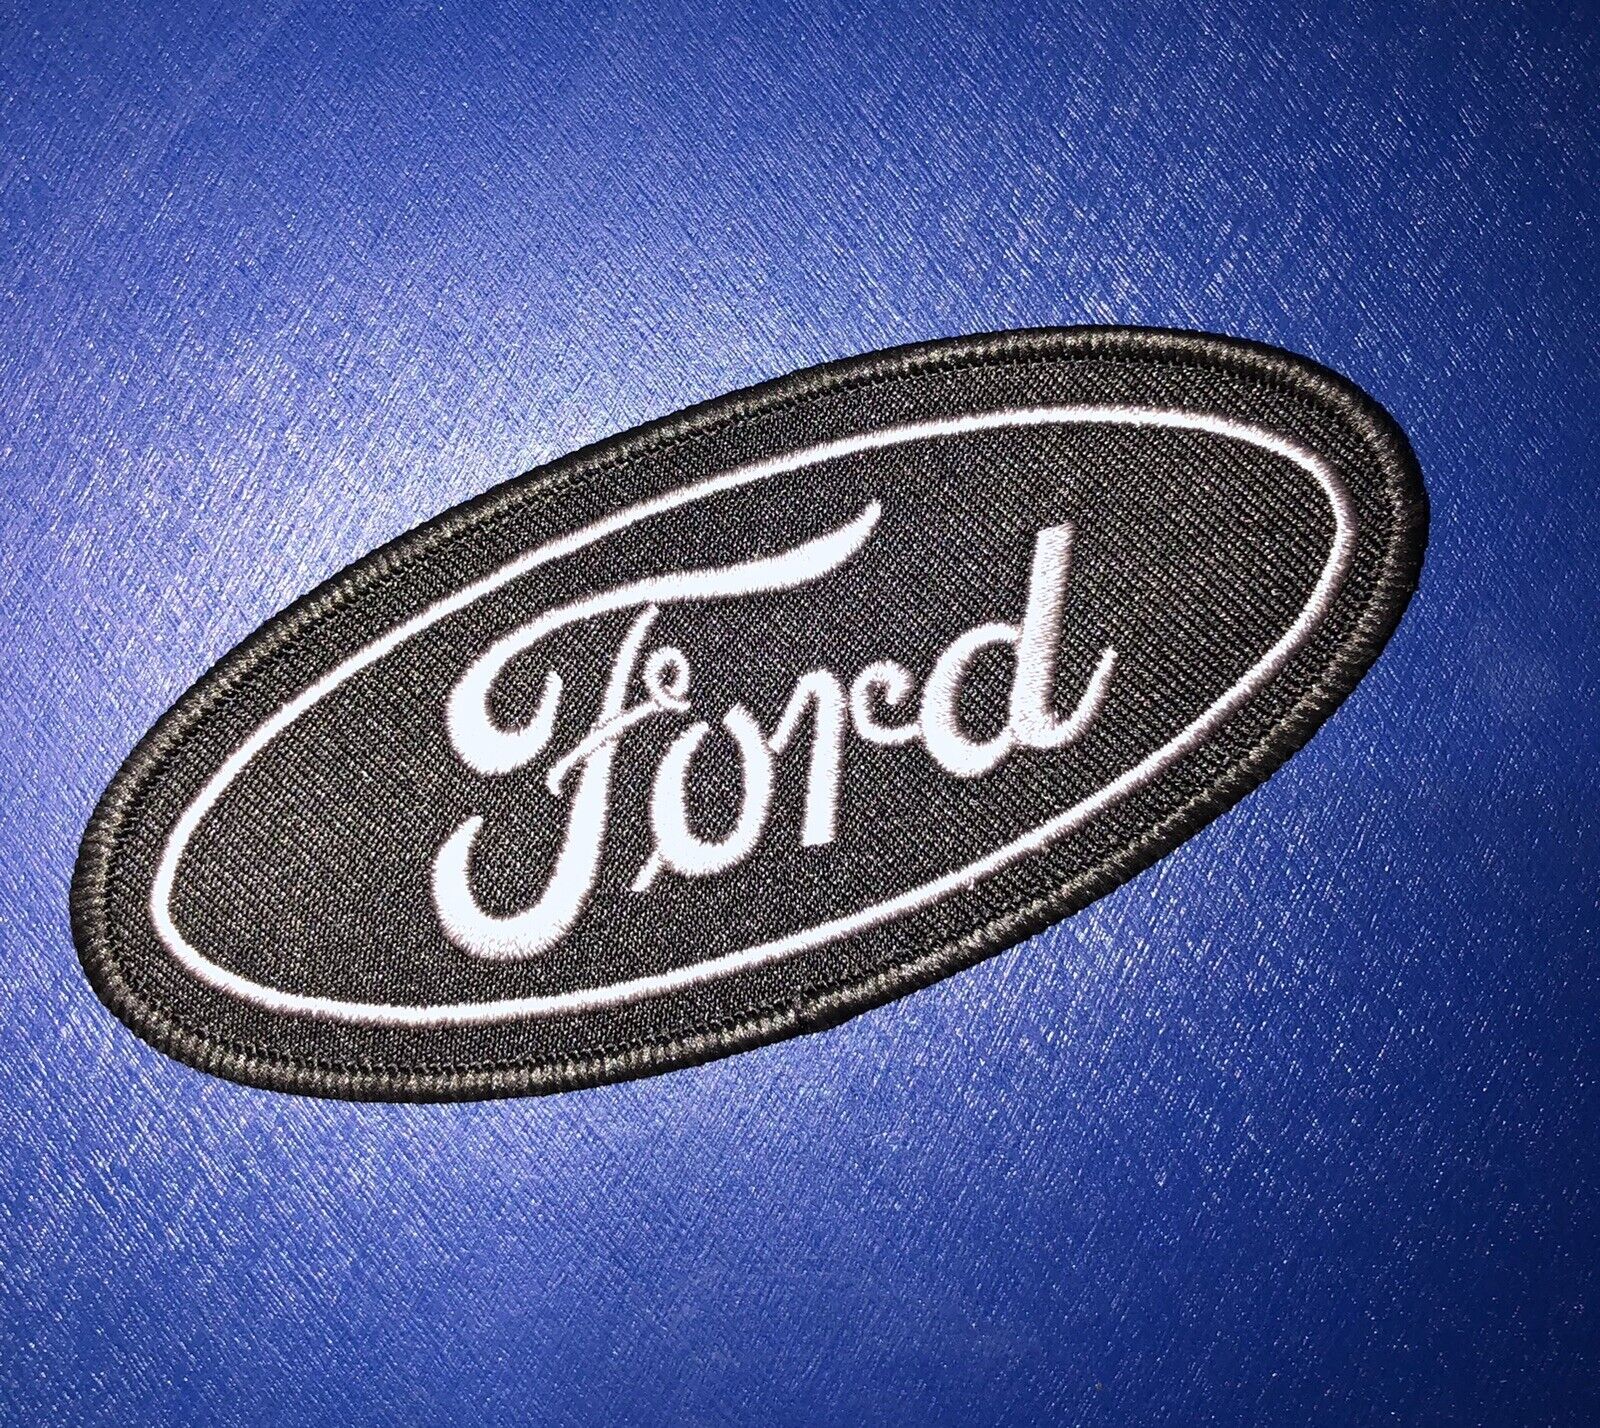 FORD Oval emblem Embroidered/ Woven Iron On Patch 2”x4.5” Black